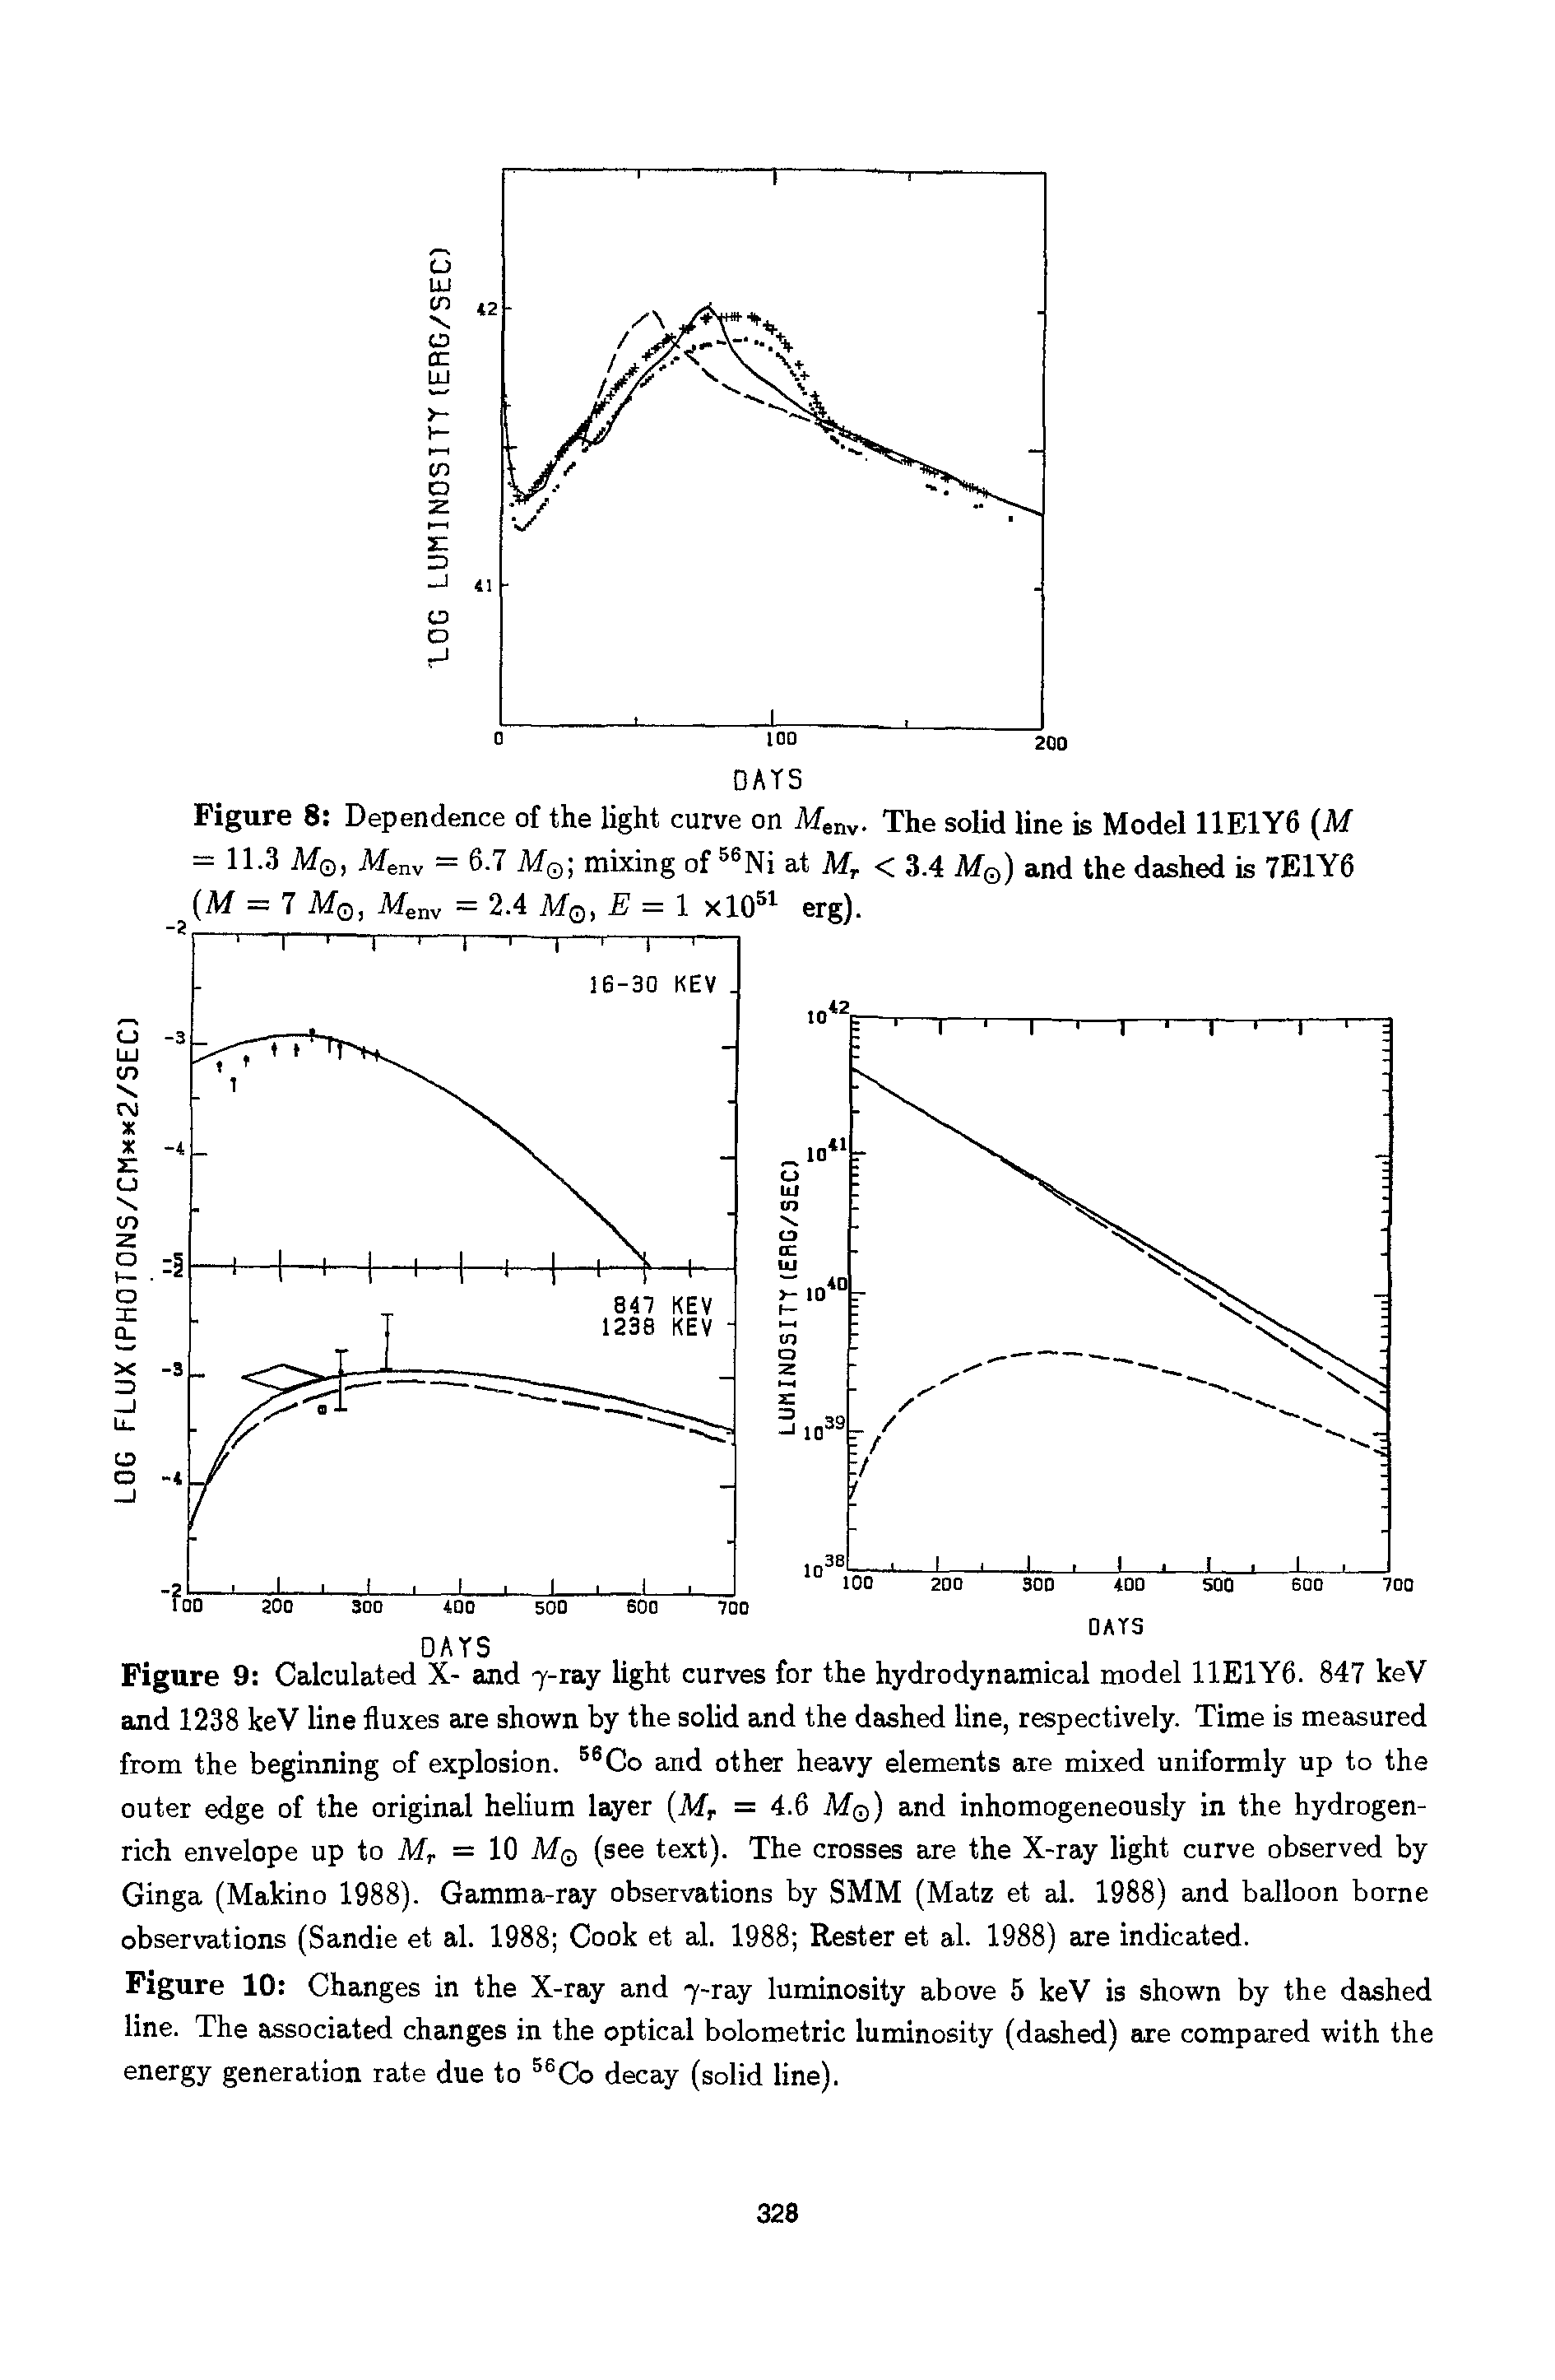 Figure 10 Changes in the X-ray and 7-ray luminosity above 5 keV is shown by the dashed line. The associated changes in the optical bolometric luminosity (dashed) are compared with the energy generation rate due to 56Co decay (solid line).